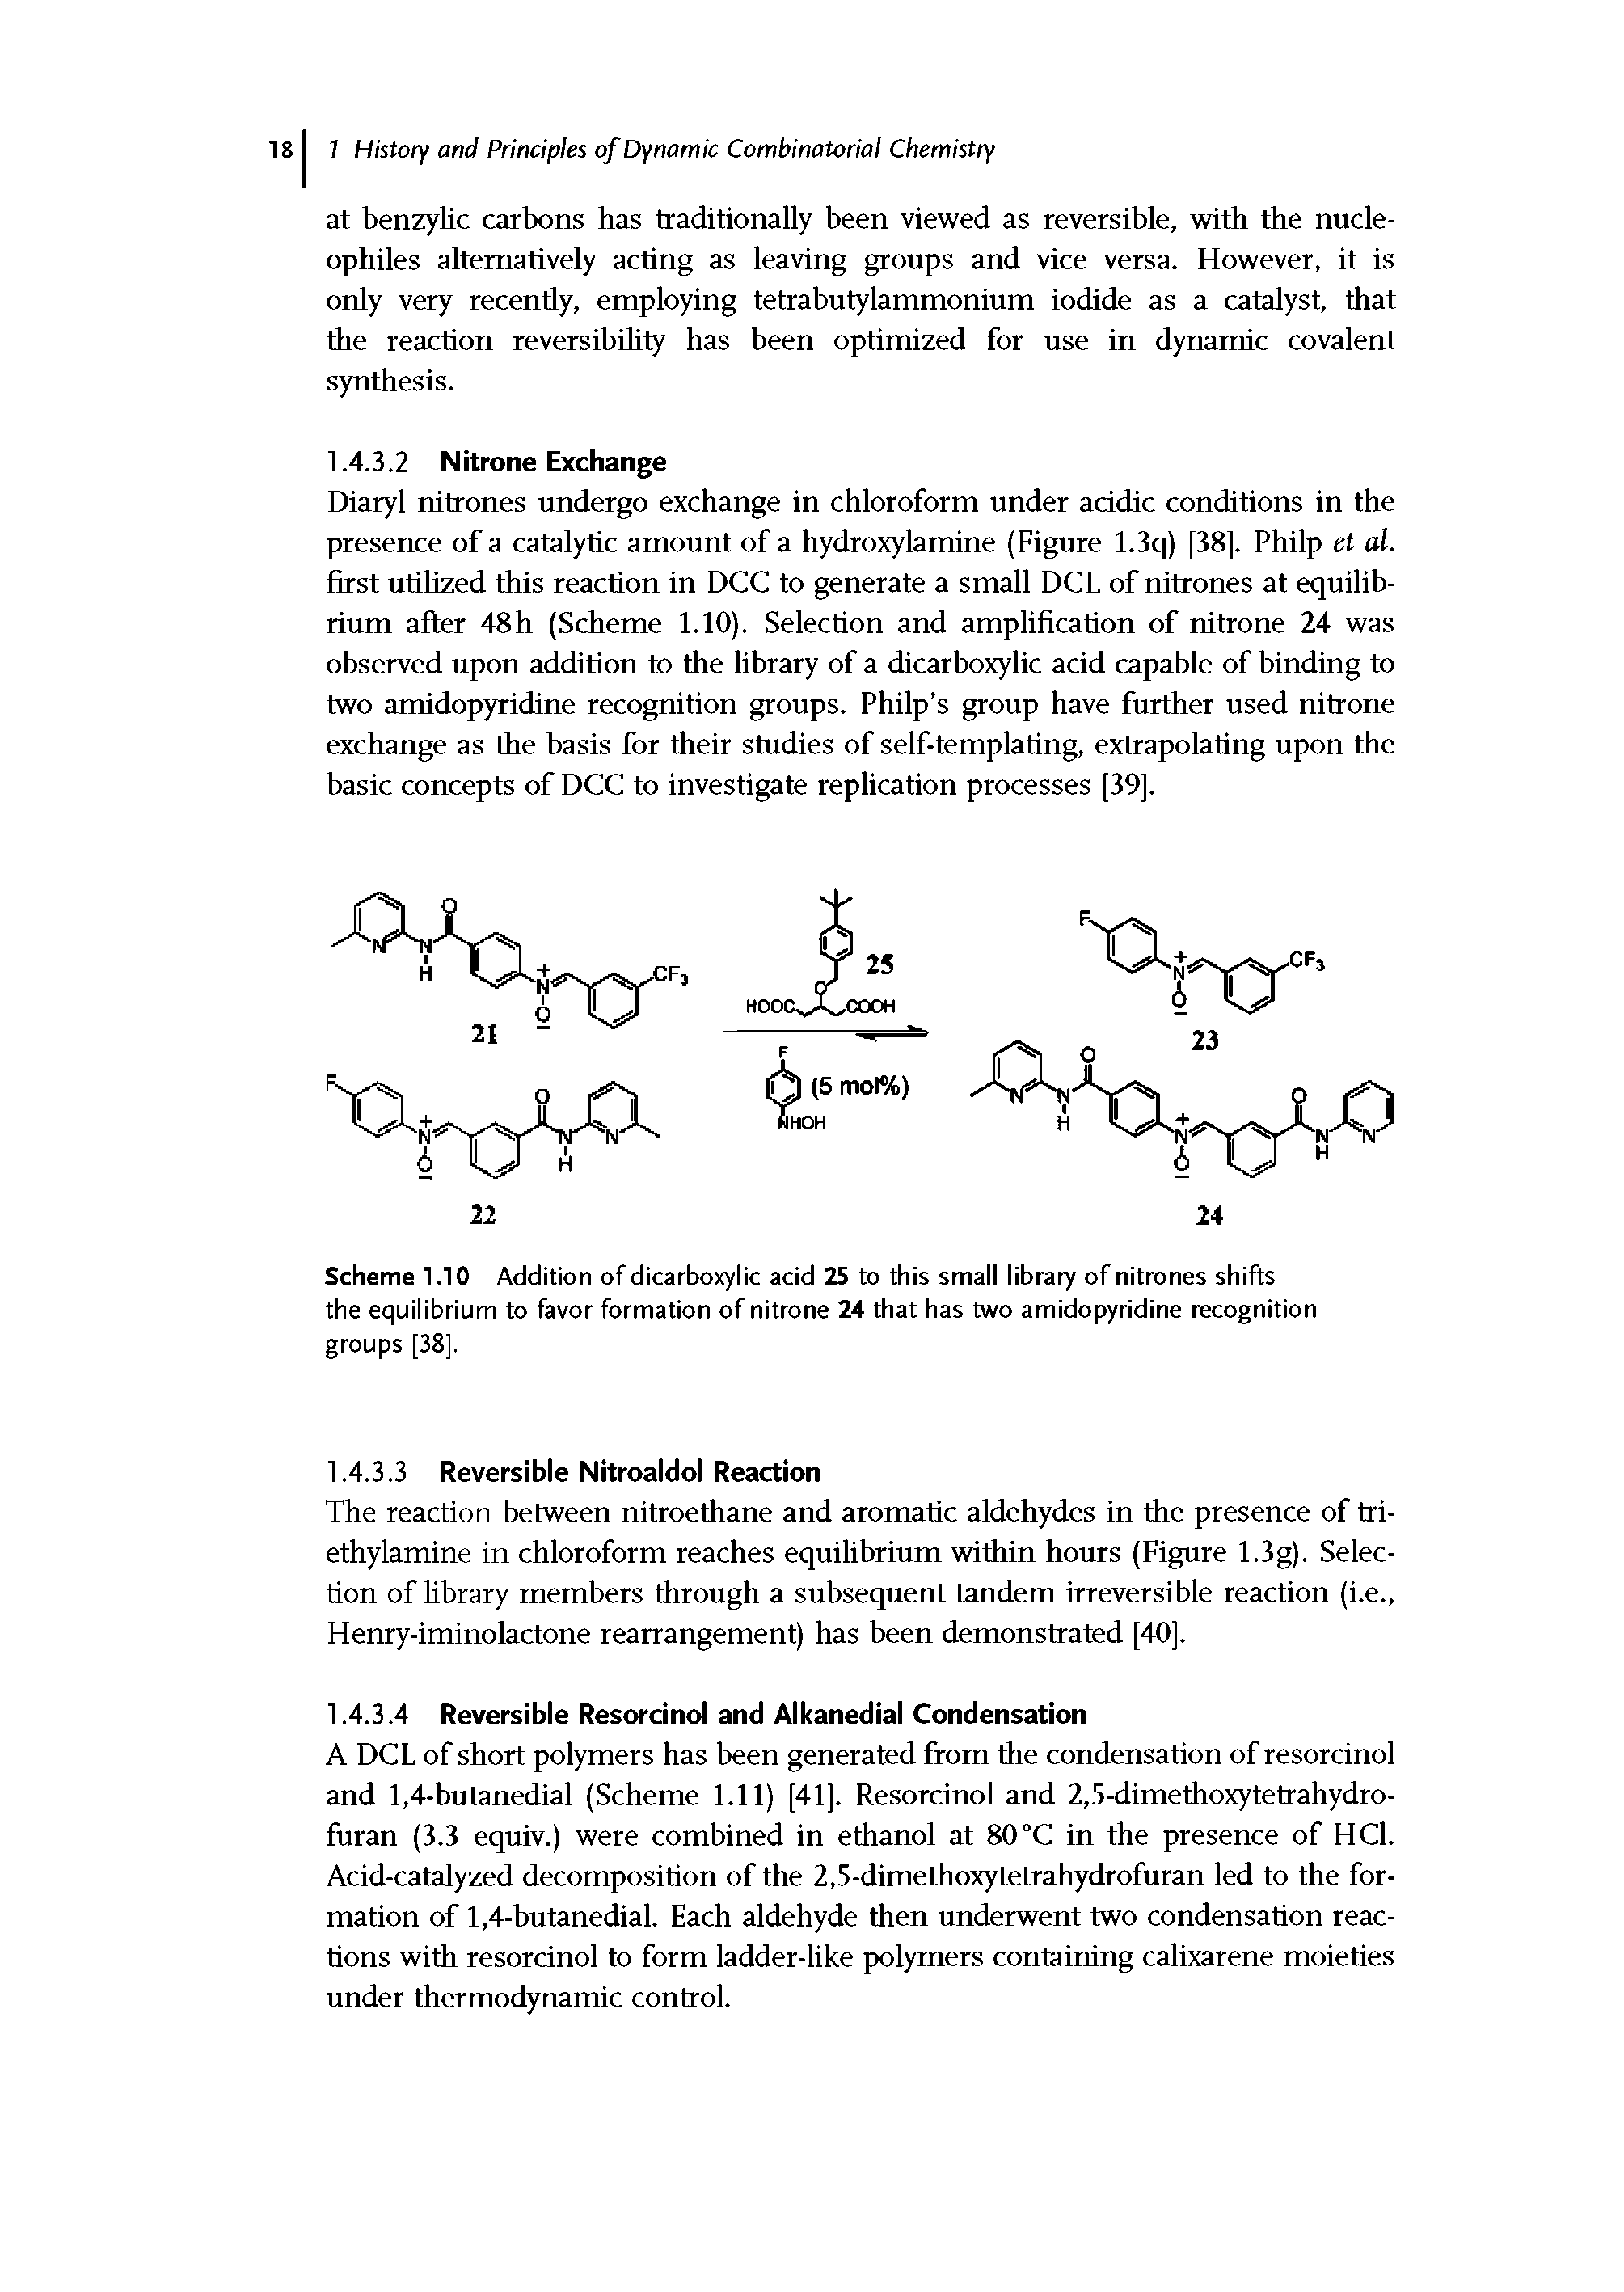 Scheme 1.10 Addition of dicarboxylic acid 25 to this small library of nitrones shifts the equilibrium to favor formation of nitrone 24 that has two amidopyridine recognition groups [38].